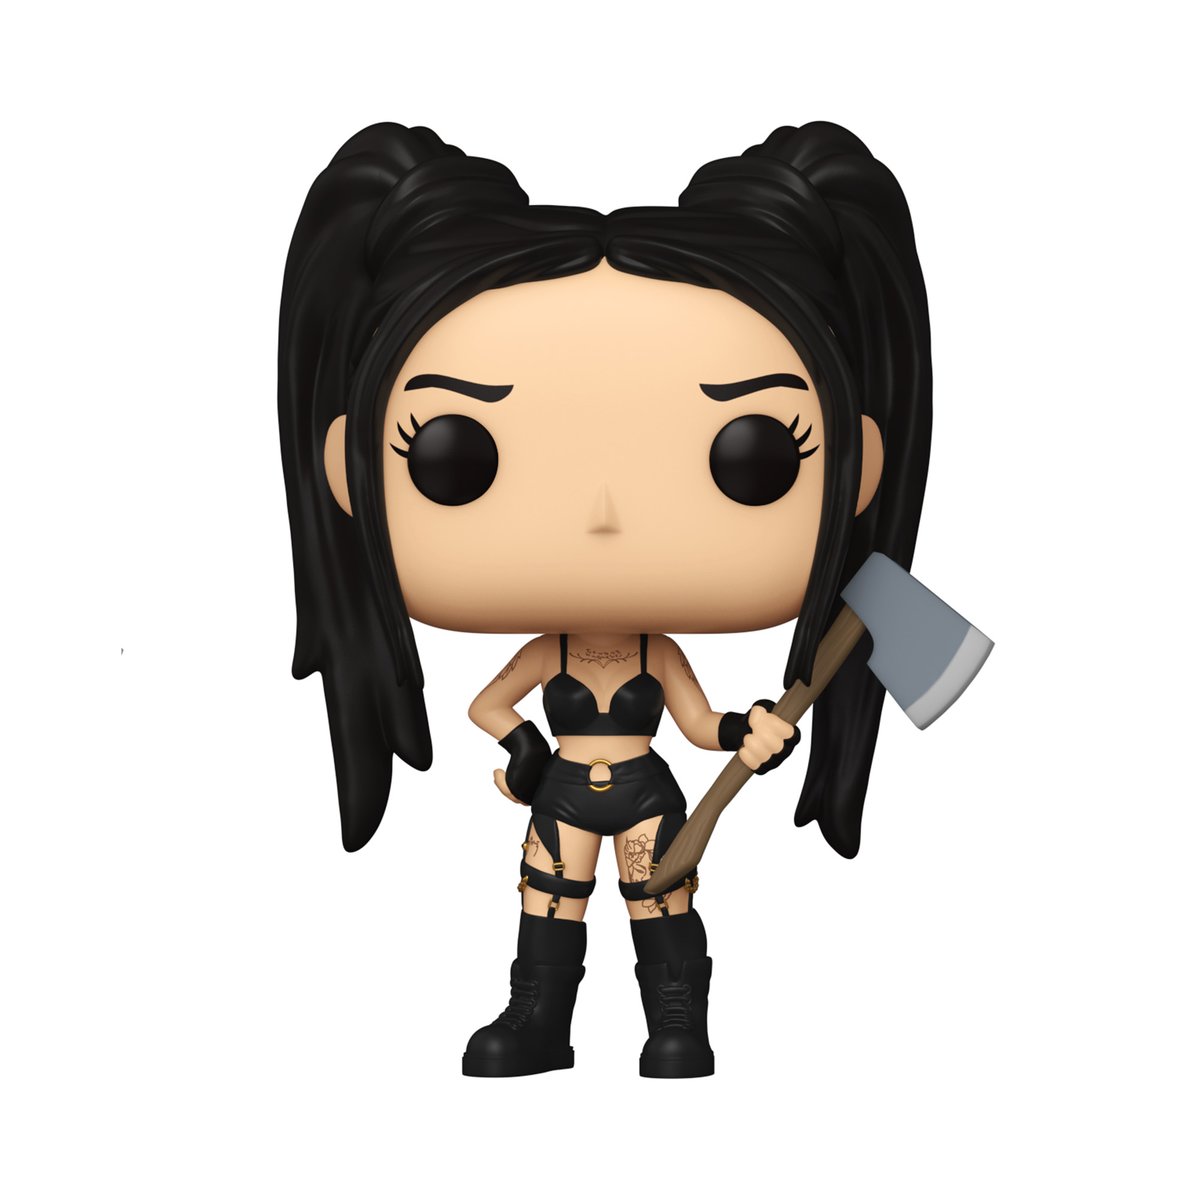 RT, Follow @originalfunko AND @bellapoarch AND comment with your favorite Bella Poarch song for the chance to WIN this Bella Poarch with Axe POP! Not feeling lucky? Order now: bit.ly/3T1qL6y #funkoPOP #funko #Giveaway #bellapoarch